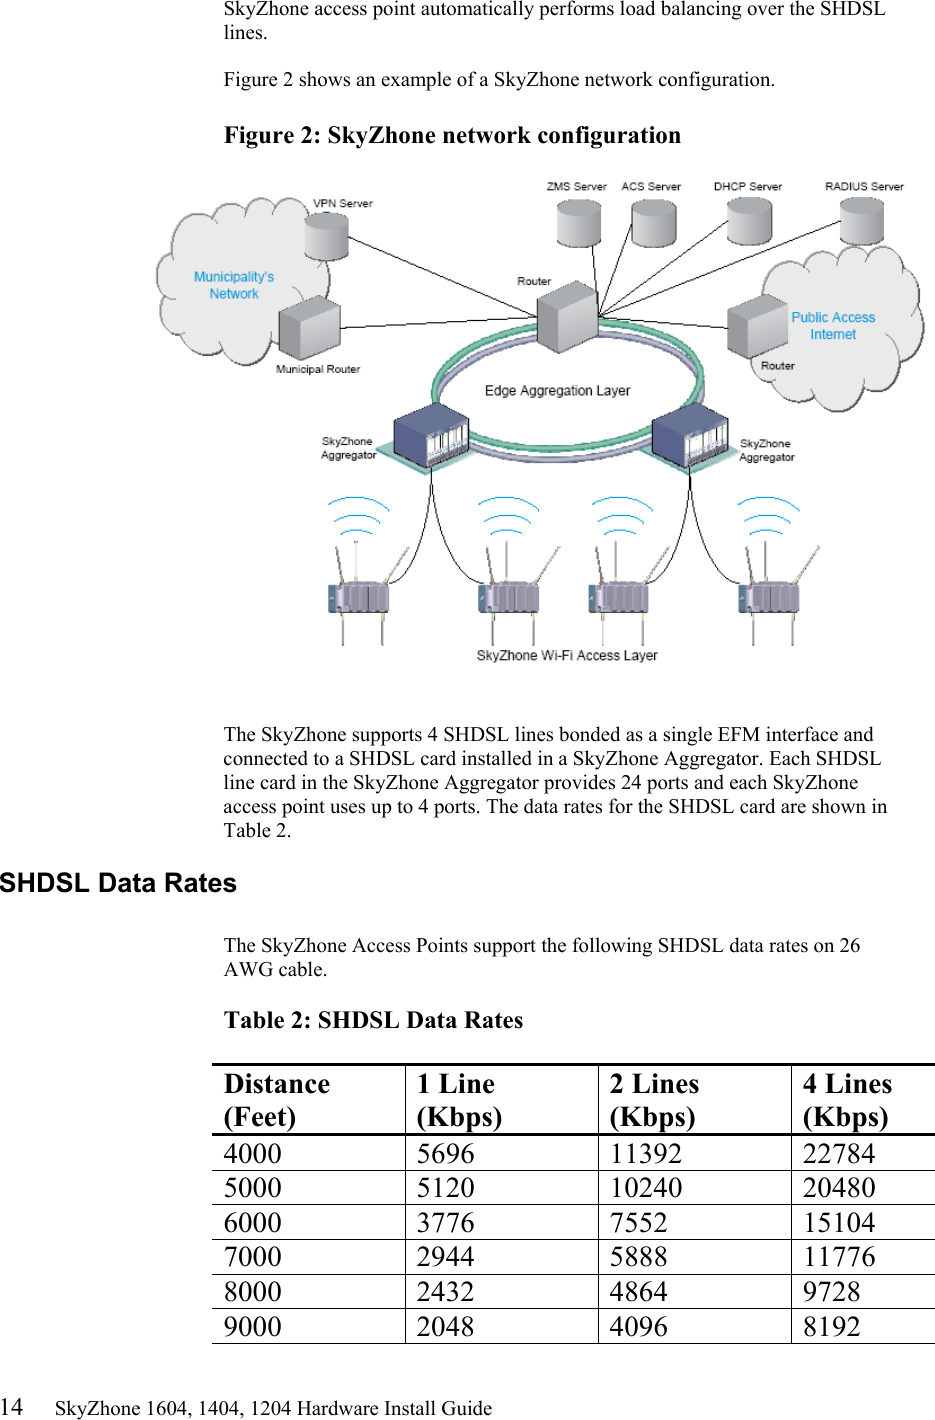 14     SkyZhone 1604, 1404, 1204 Hardware Install Guide SkyZhone access point automatically performs load balancing over the SHDSL lines.  Figure 2 shows an example of a SkyZhone network configuration.  Figure 2: SkyZhone network configuration    The SkyZhone supports 4 SHDSL lines bonded as a single EFM interface and connected to a SHDSL card installed in a SkyZhone Aggregator. Each SHDSL line card in the SkyZhone Aggregator provides 24 ports and each SkyZhone access point uses up to 4 ports. The data rates for the SHDSL card are shown in Table 2. SHDSL Data Rates  The SkyZhone Access Points support the following SHDSL data rates on 26 AWG cable.  Table 2: SHDSL Data Rates  Distance (Feet) 1 Line (Kbps) 2 Lines (Kbps) 4 Lines (Kbps) 4000 5696 11392 22784 5000   5120  10240  20480 6000 3776 7552  15104  7000 2944 5888 11776 8000 2432 4864 9728 9000 2048 4096 8192 